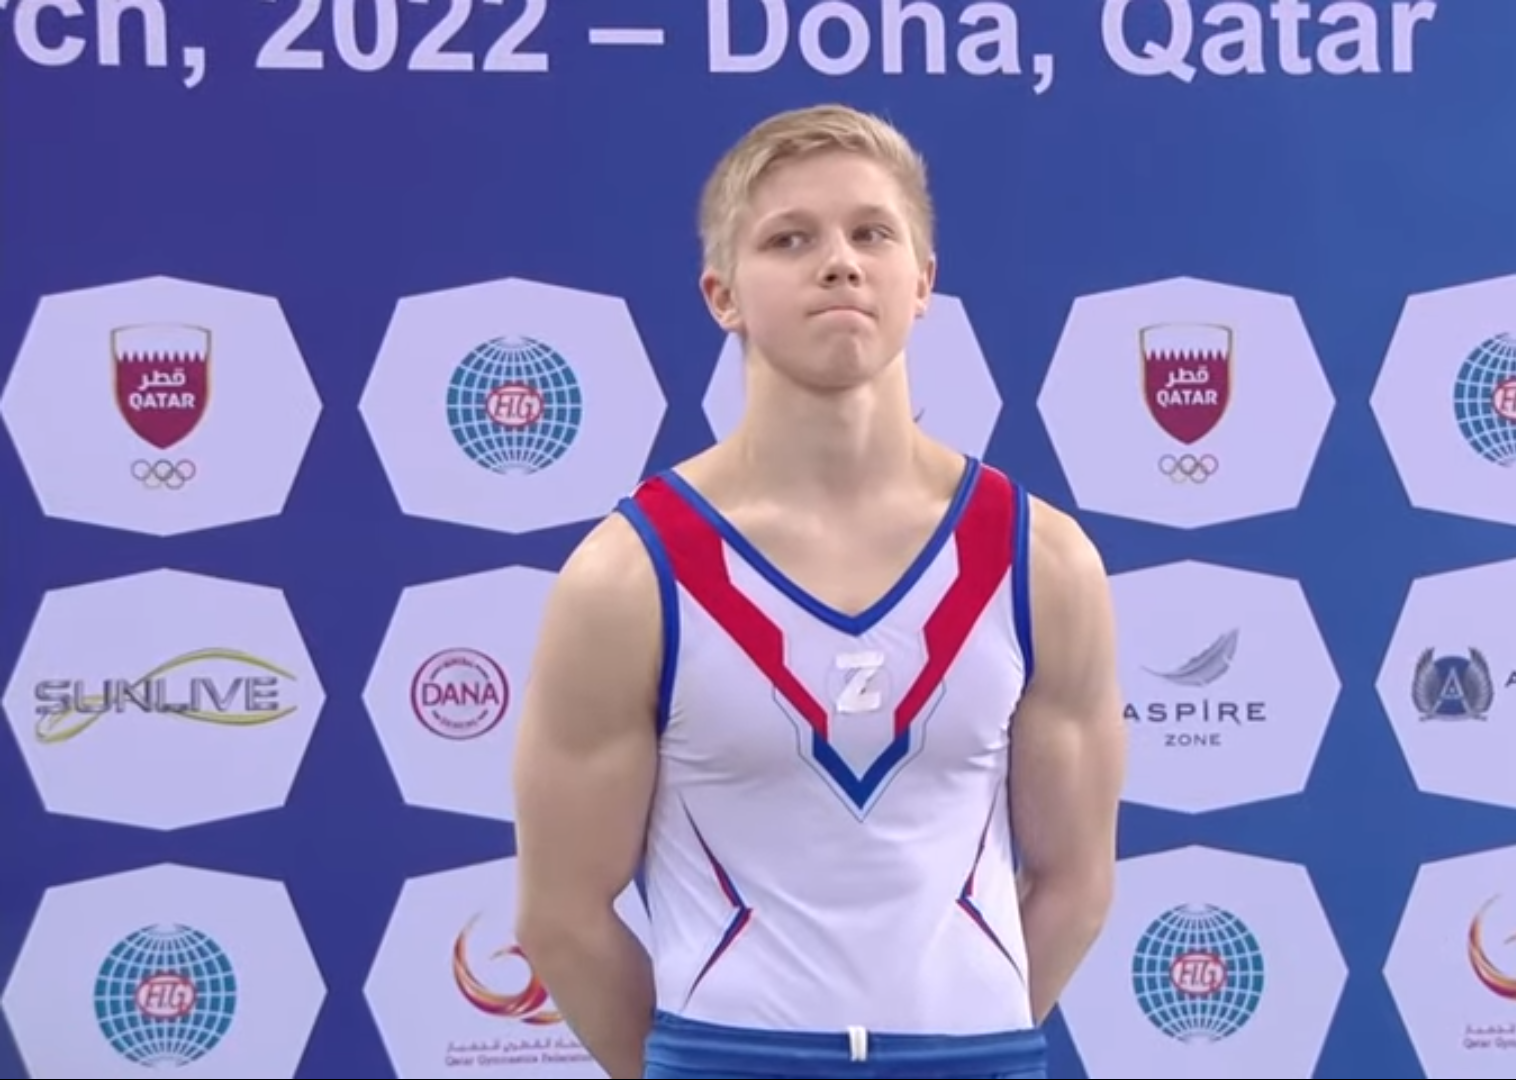 Ivan Kuliak reportedly faces a one-year ban from gymnastics after displaying the Russian war symbol "Z" on his vest at the FIG World Cup event in Doha earlier this month ©YouTube